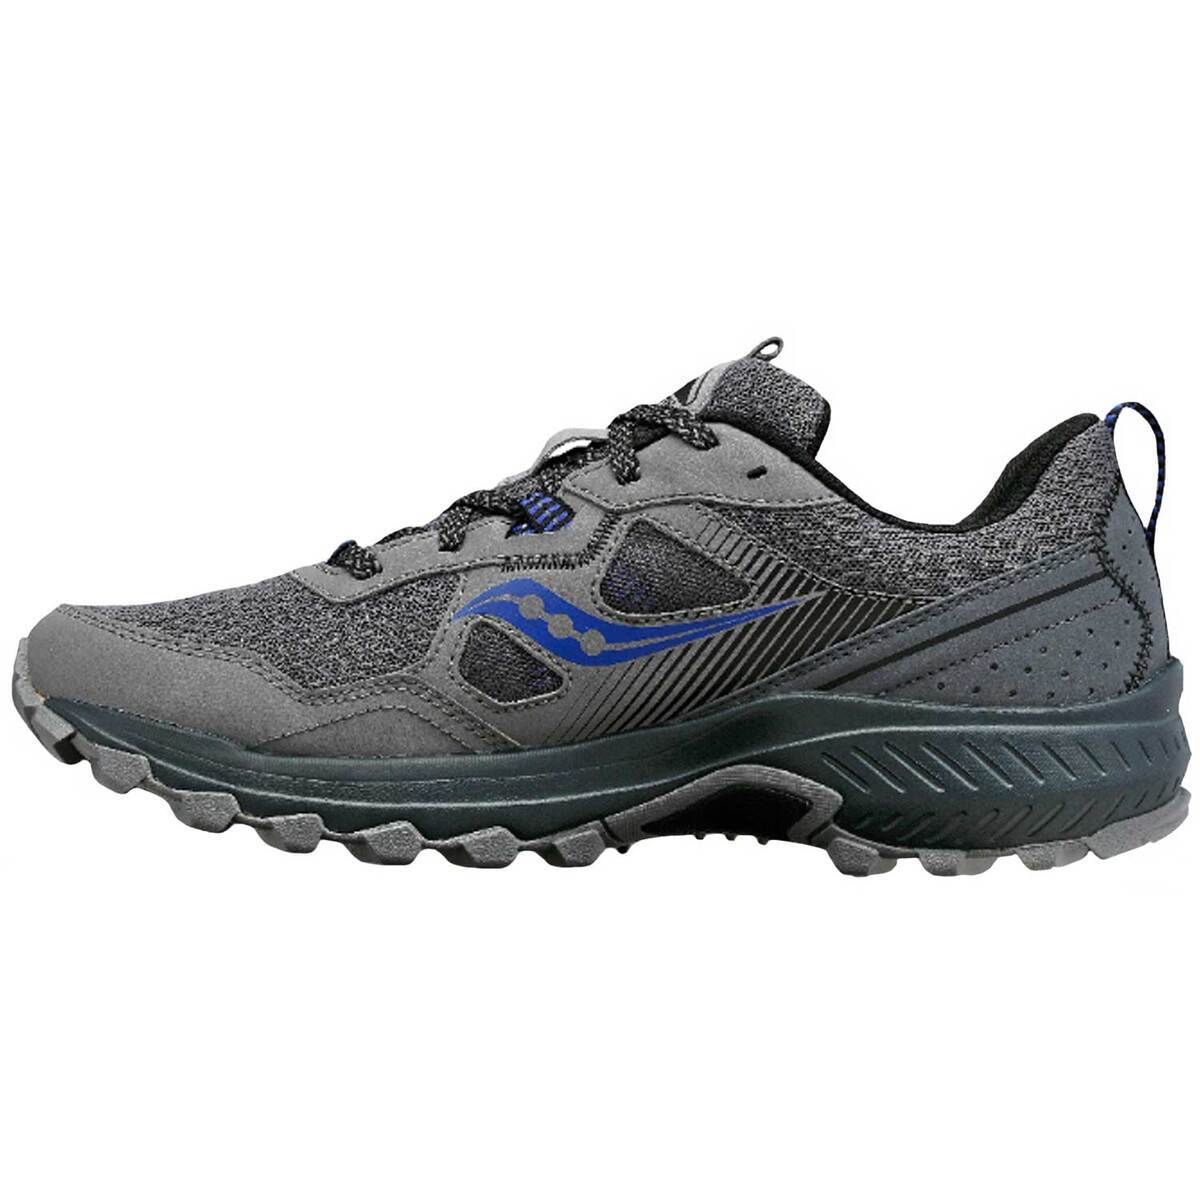 Saucony Men's Excursion TR16 Trail Running Shoes | Sportsman's Warehouse